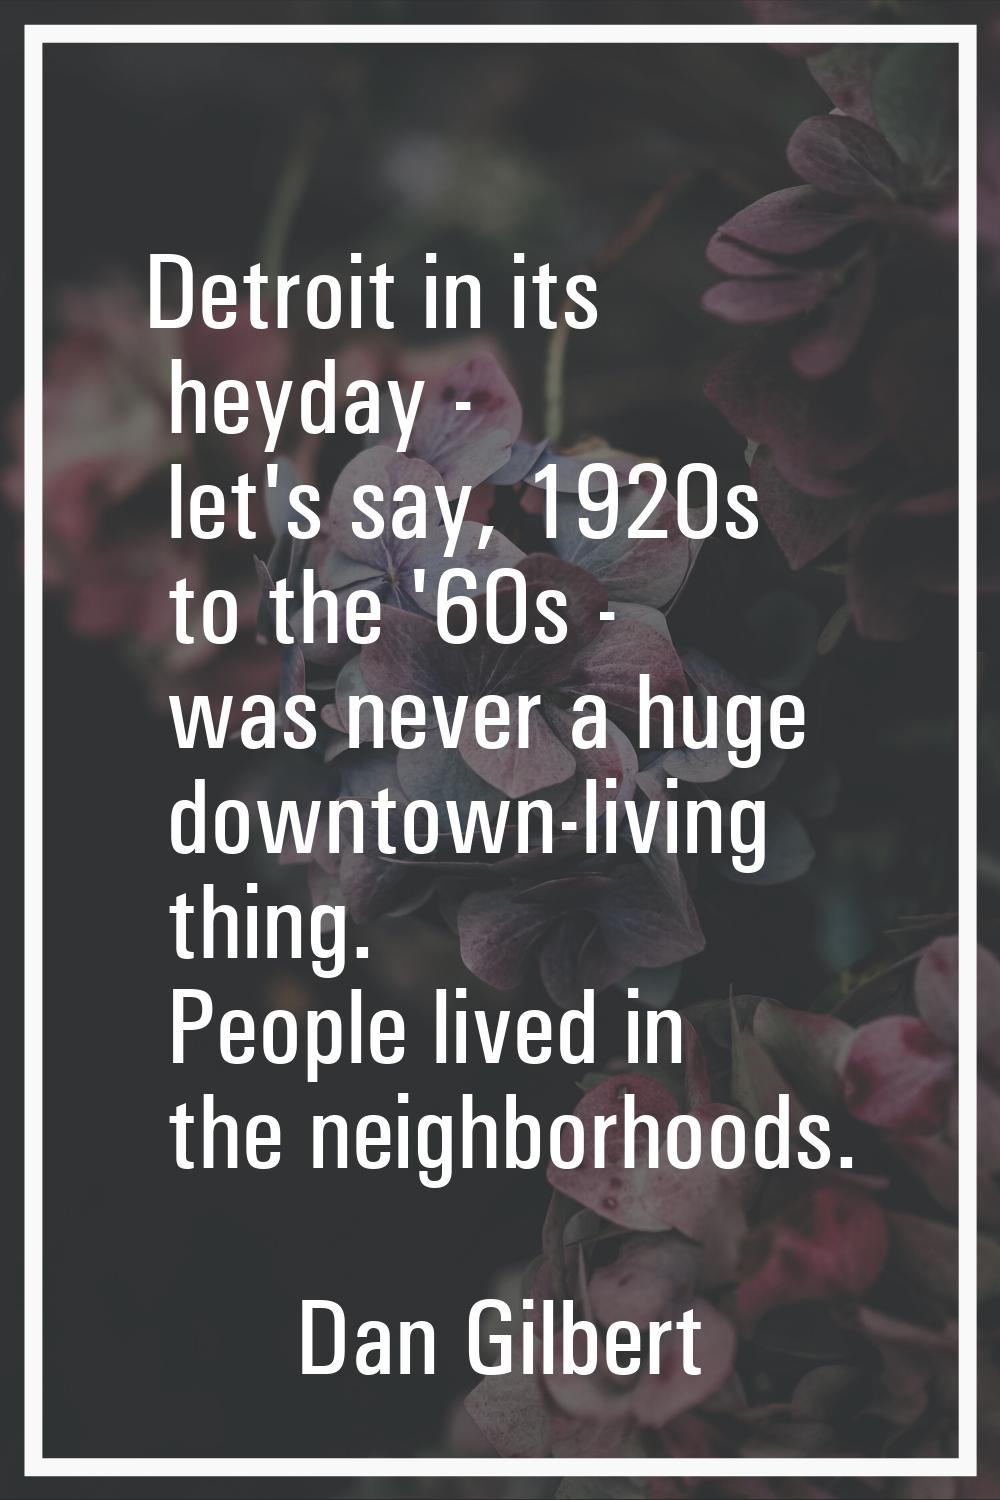 Detroit in its heyday - let's say, 1920s to the '60s - was never a huge downtown-living thing. Peop